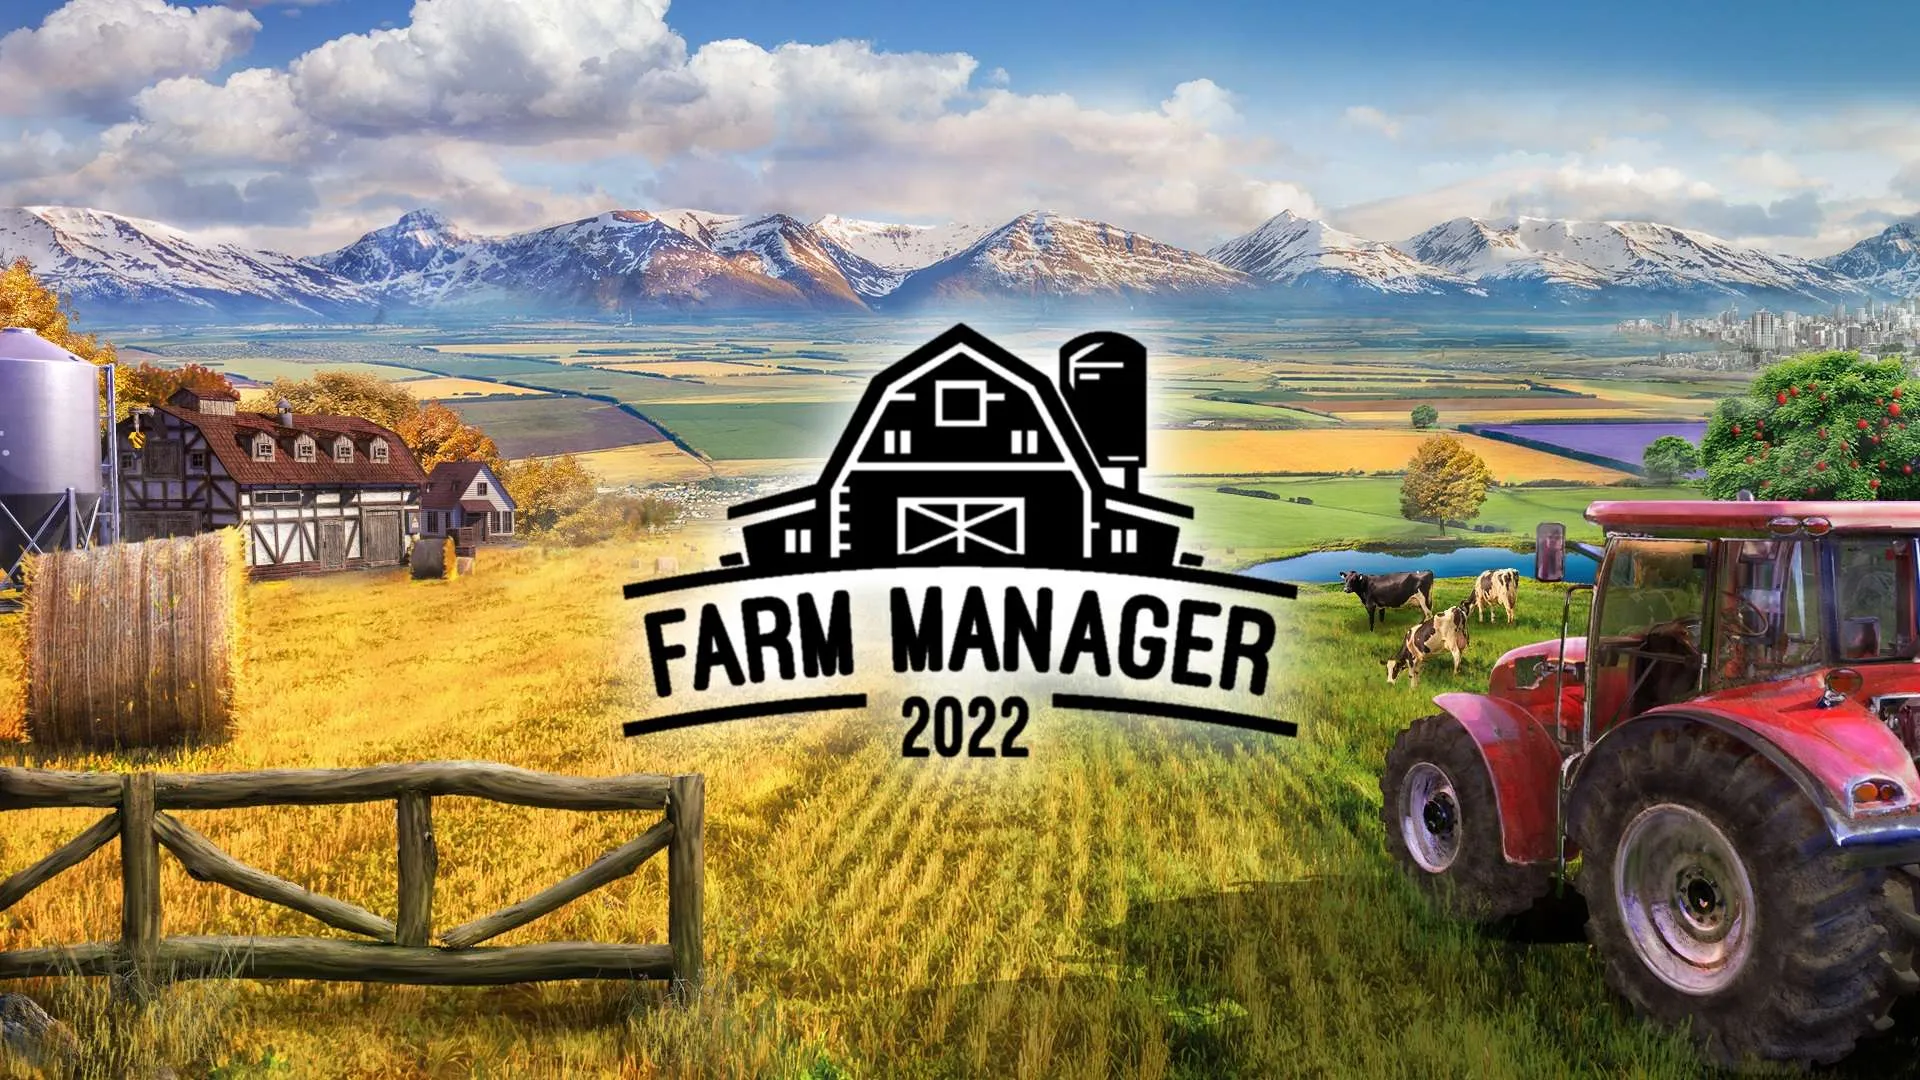 Farm Manager 2022 is nu uitgebracht op Xbox-consoles